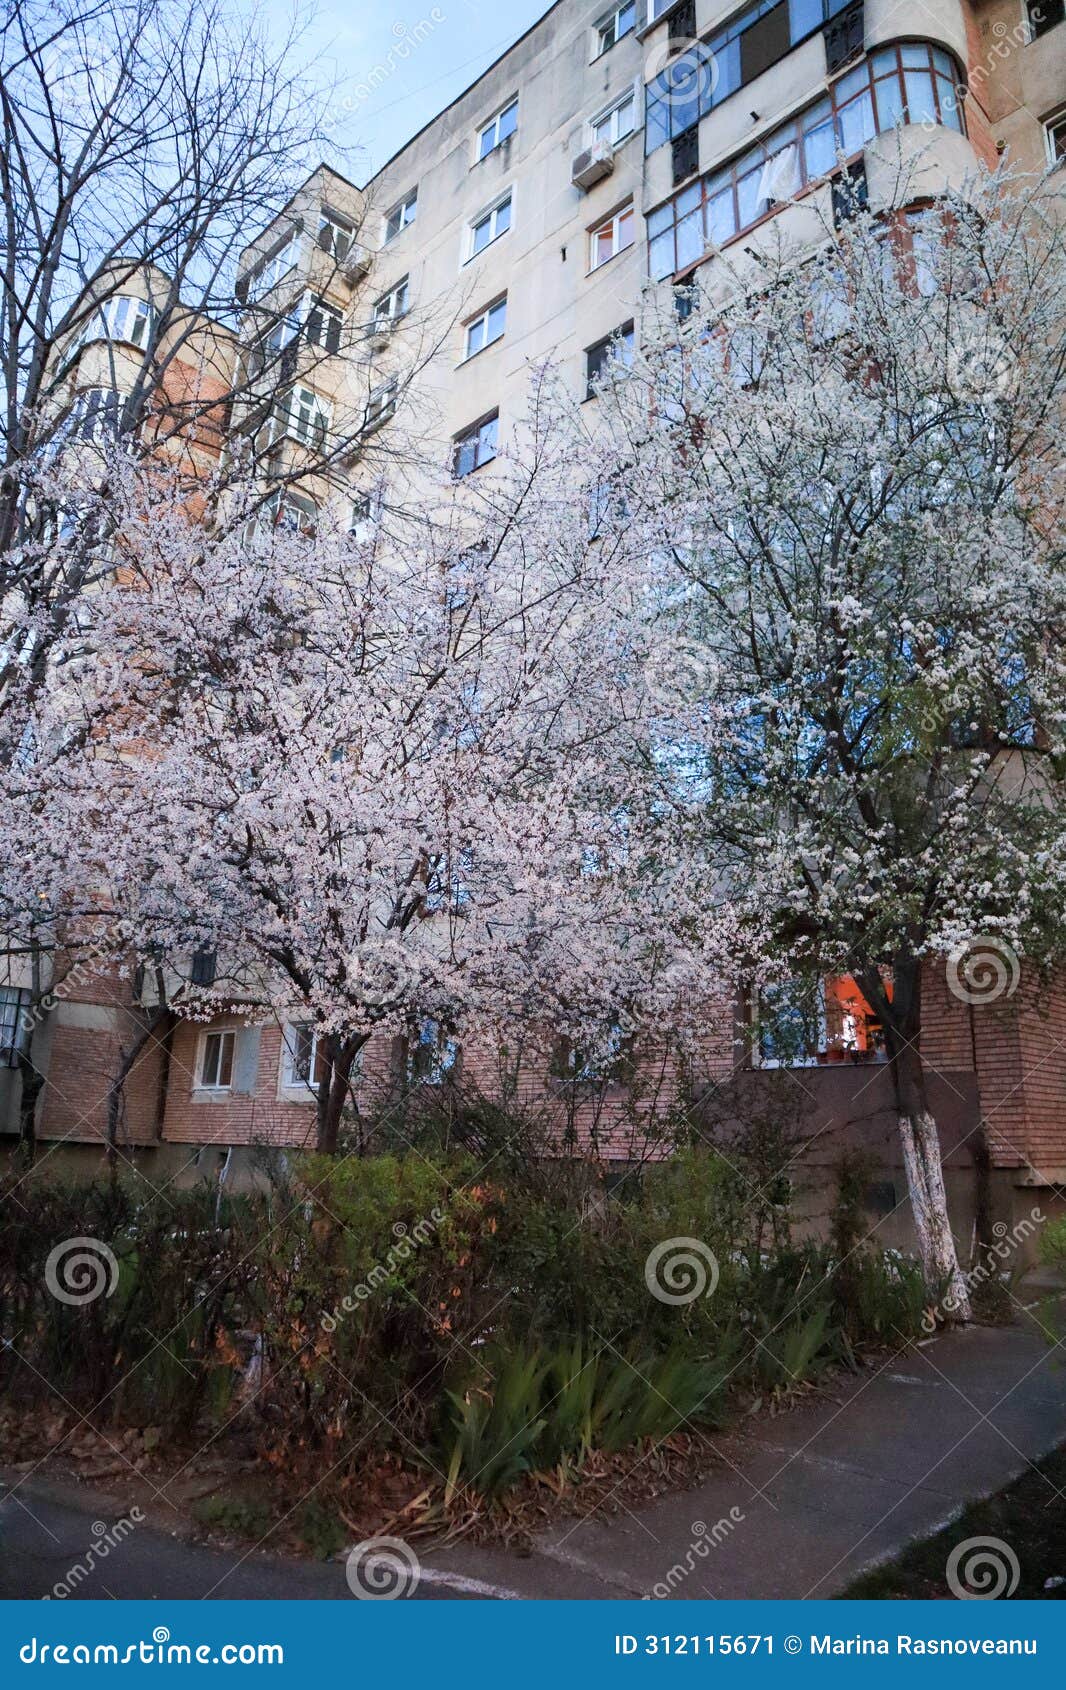 plum blossom tree in front of a block of flats, romania, south-eastern europe